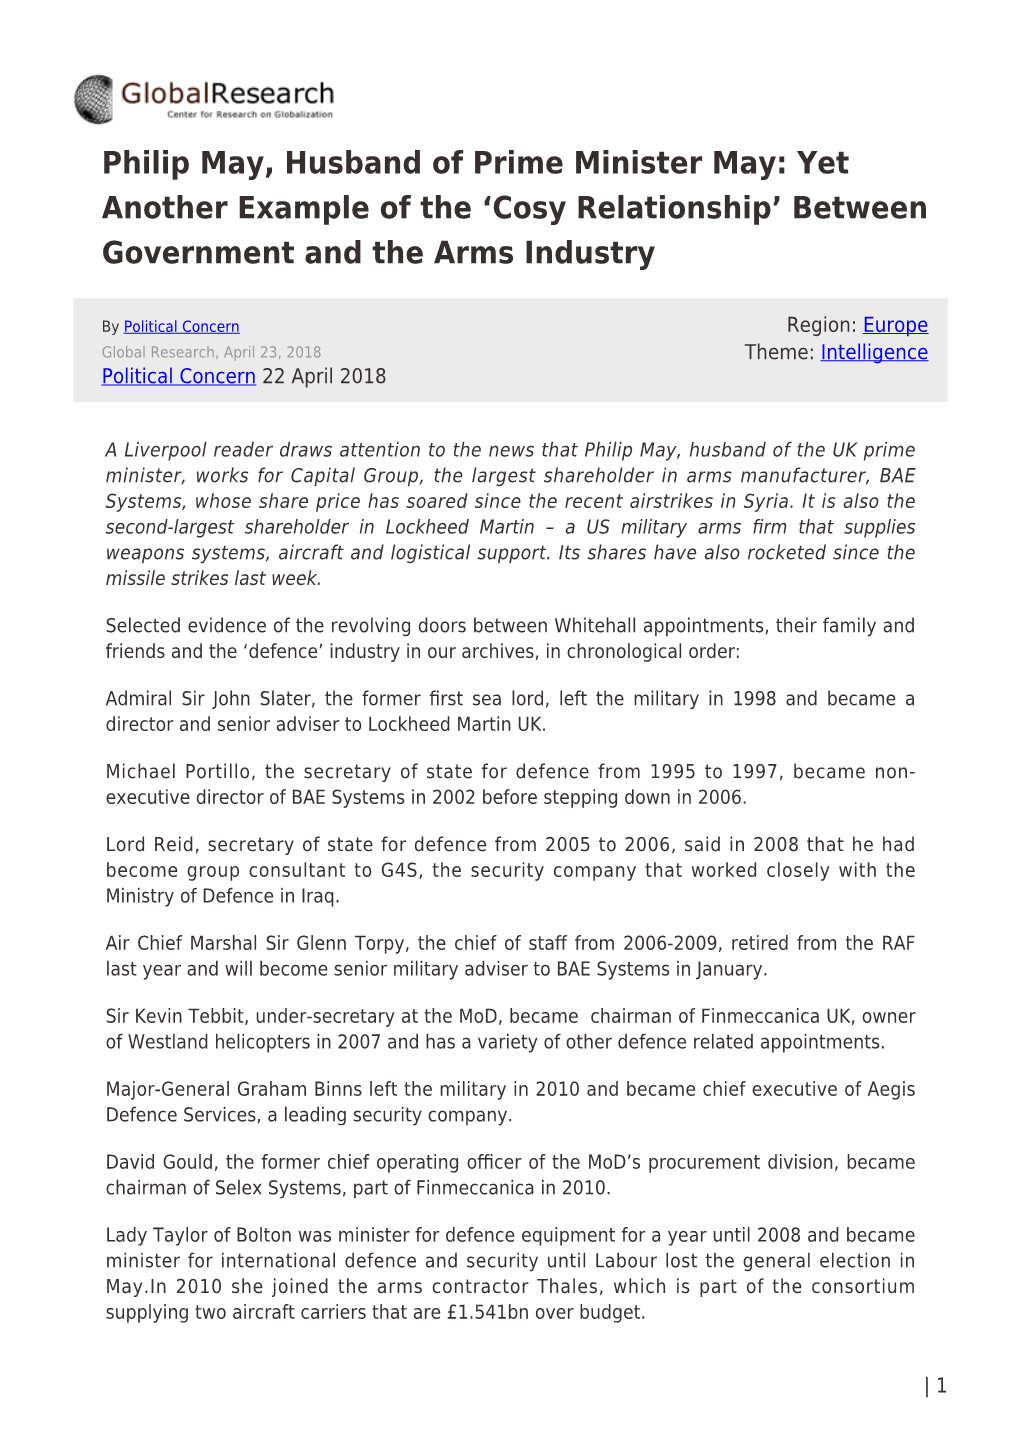 Philip May, Husband of Prime Minister May: Yet Another Example of the ‘Cosy Relationship’ Between Government and the Arms Industry